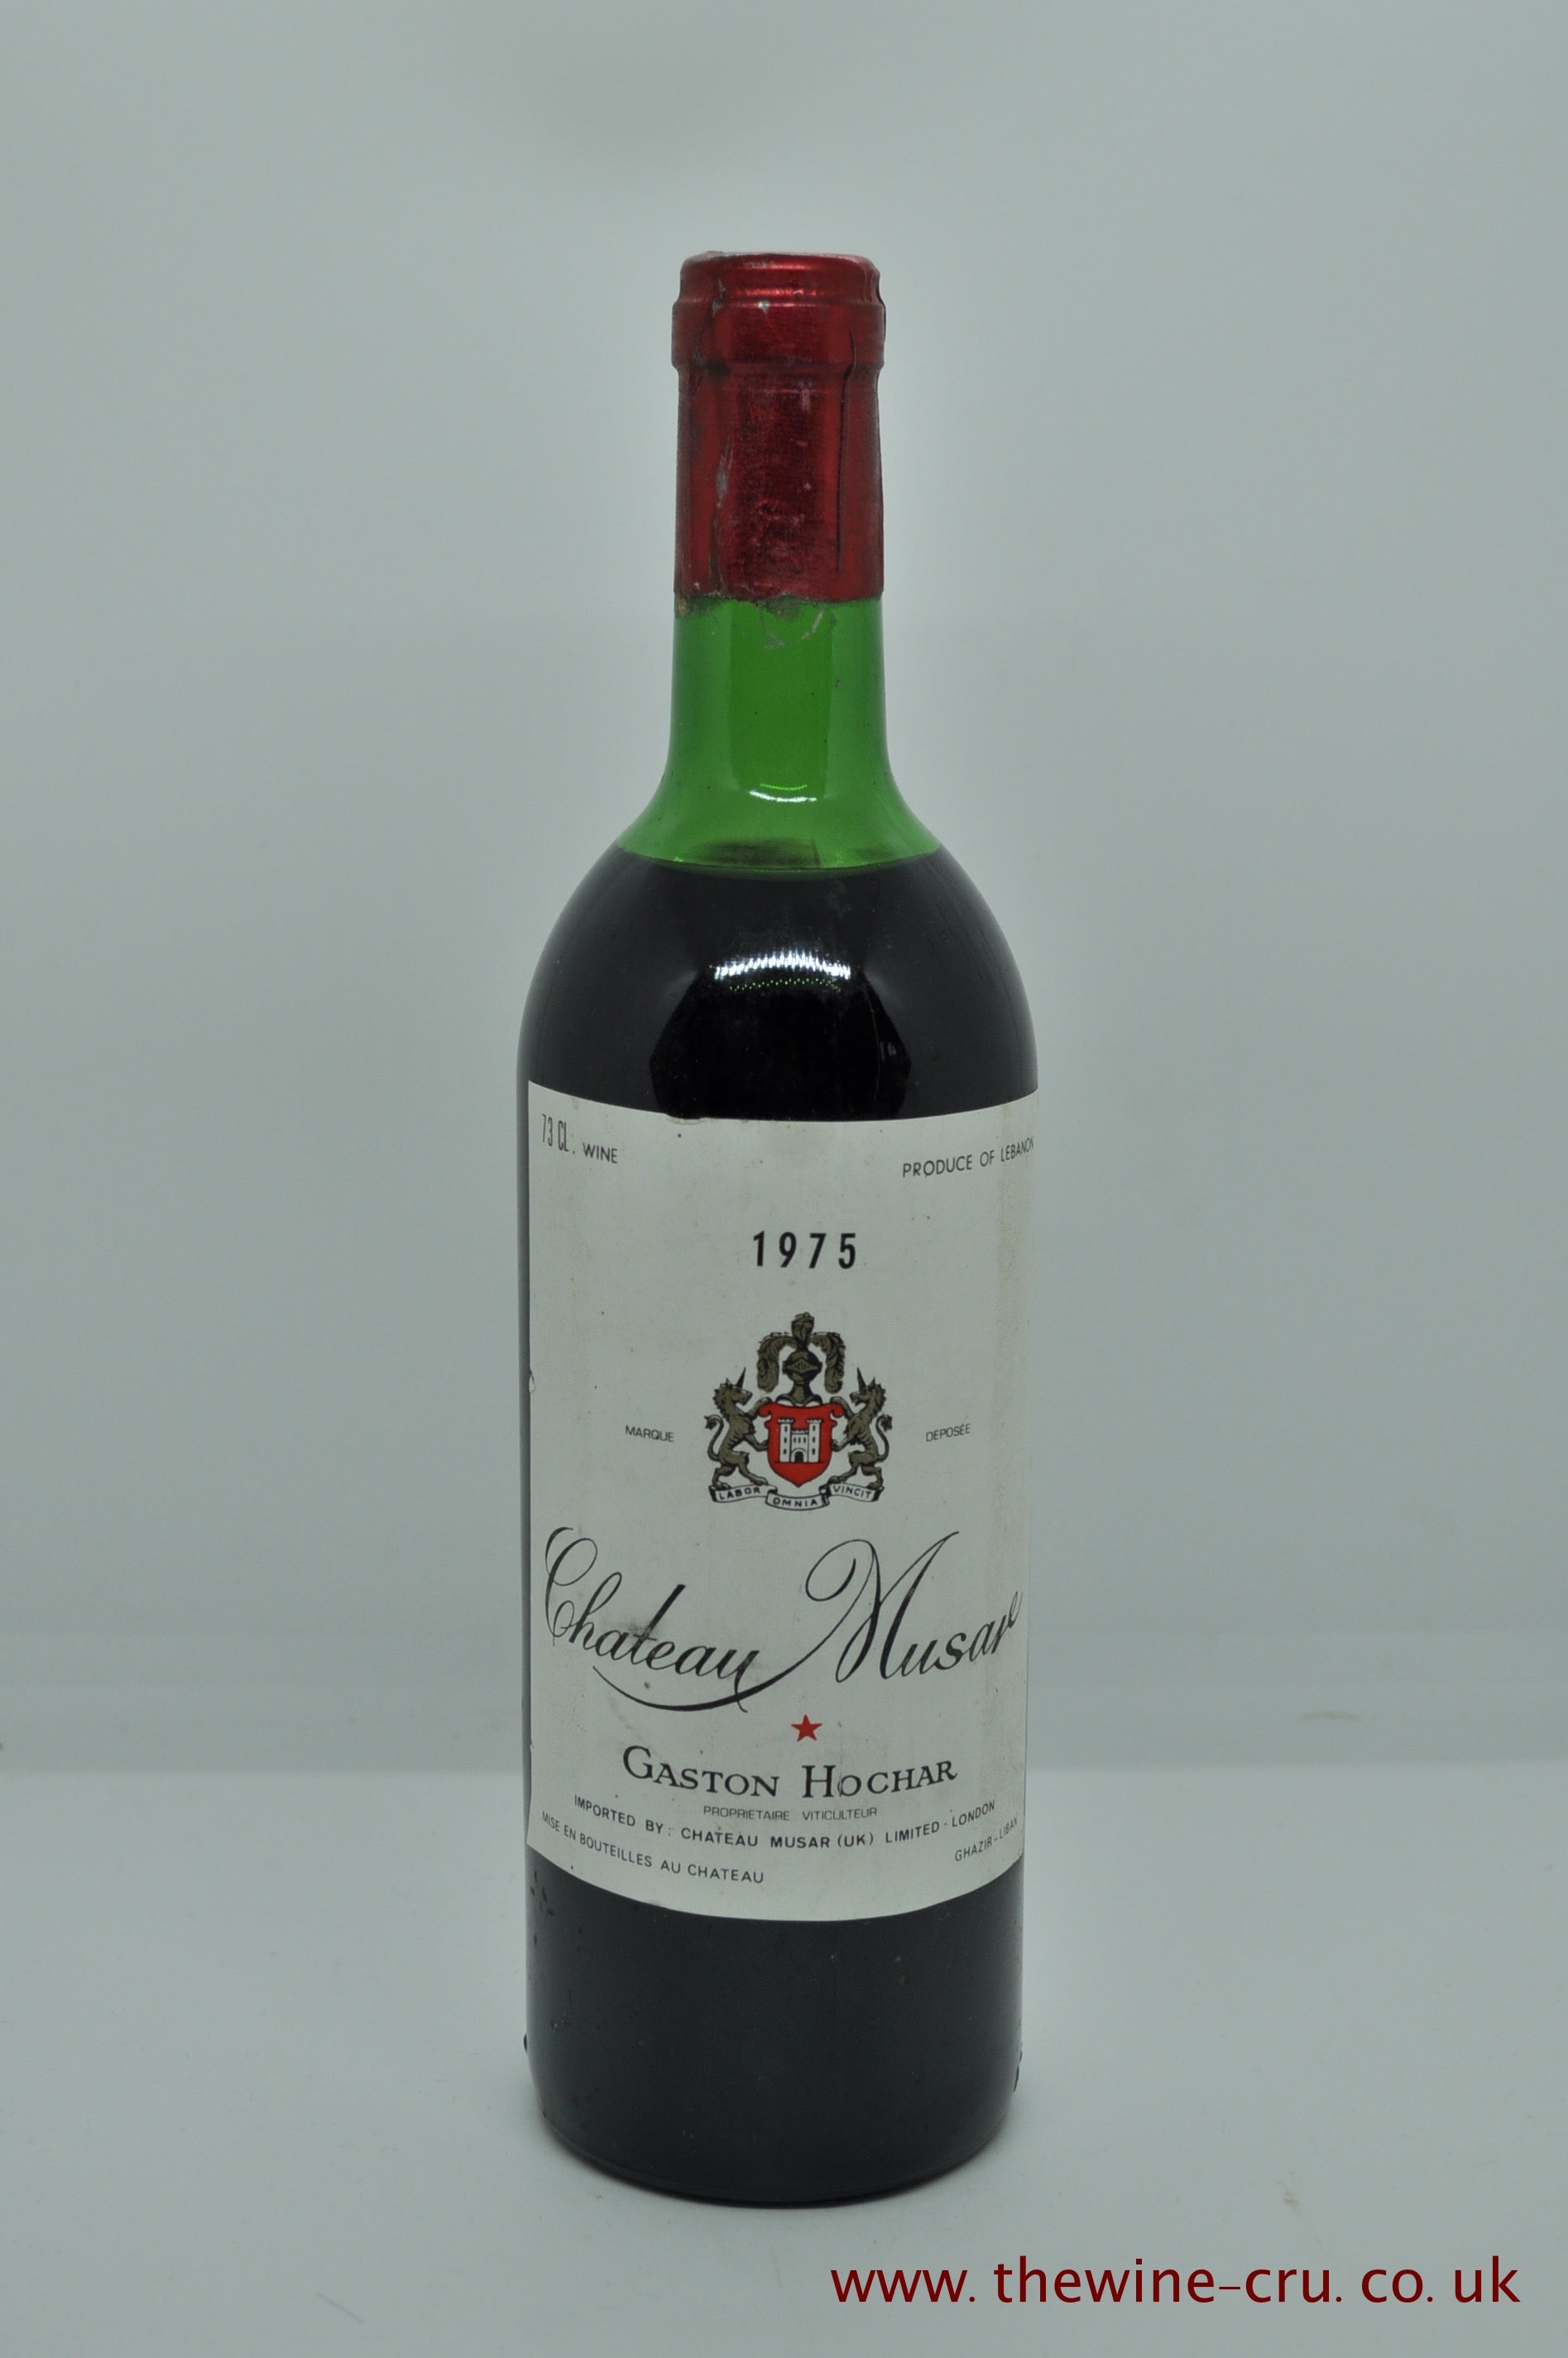 1975 vintage red wine. Chateau Musar, Lebanon. The bottle is in good condition with the lwine level top shoulder. Immediate delivery. Free local delivery. Gift wrapping available.